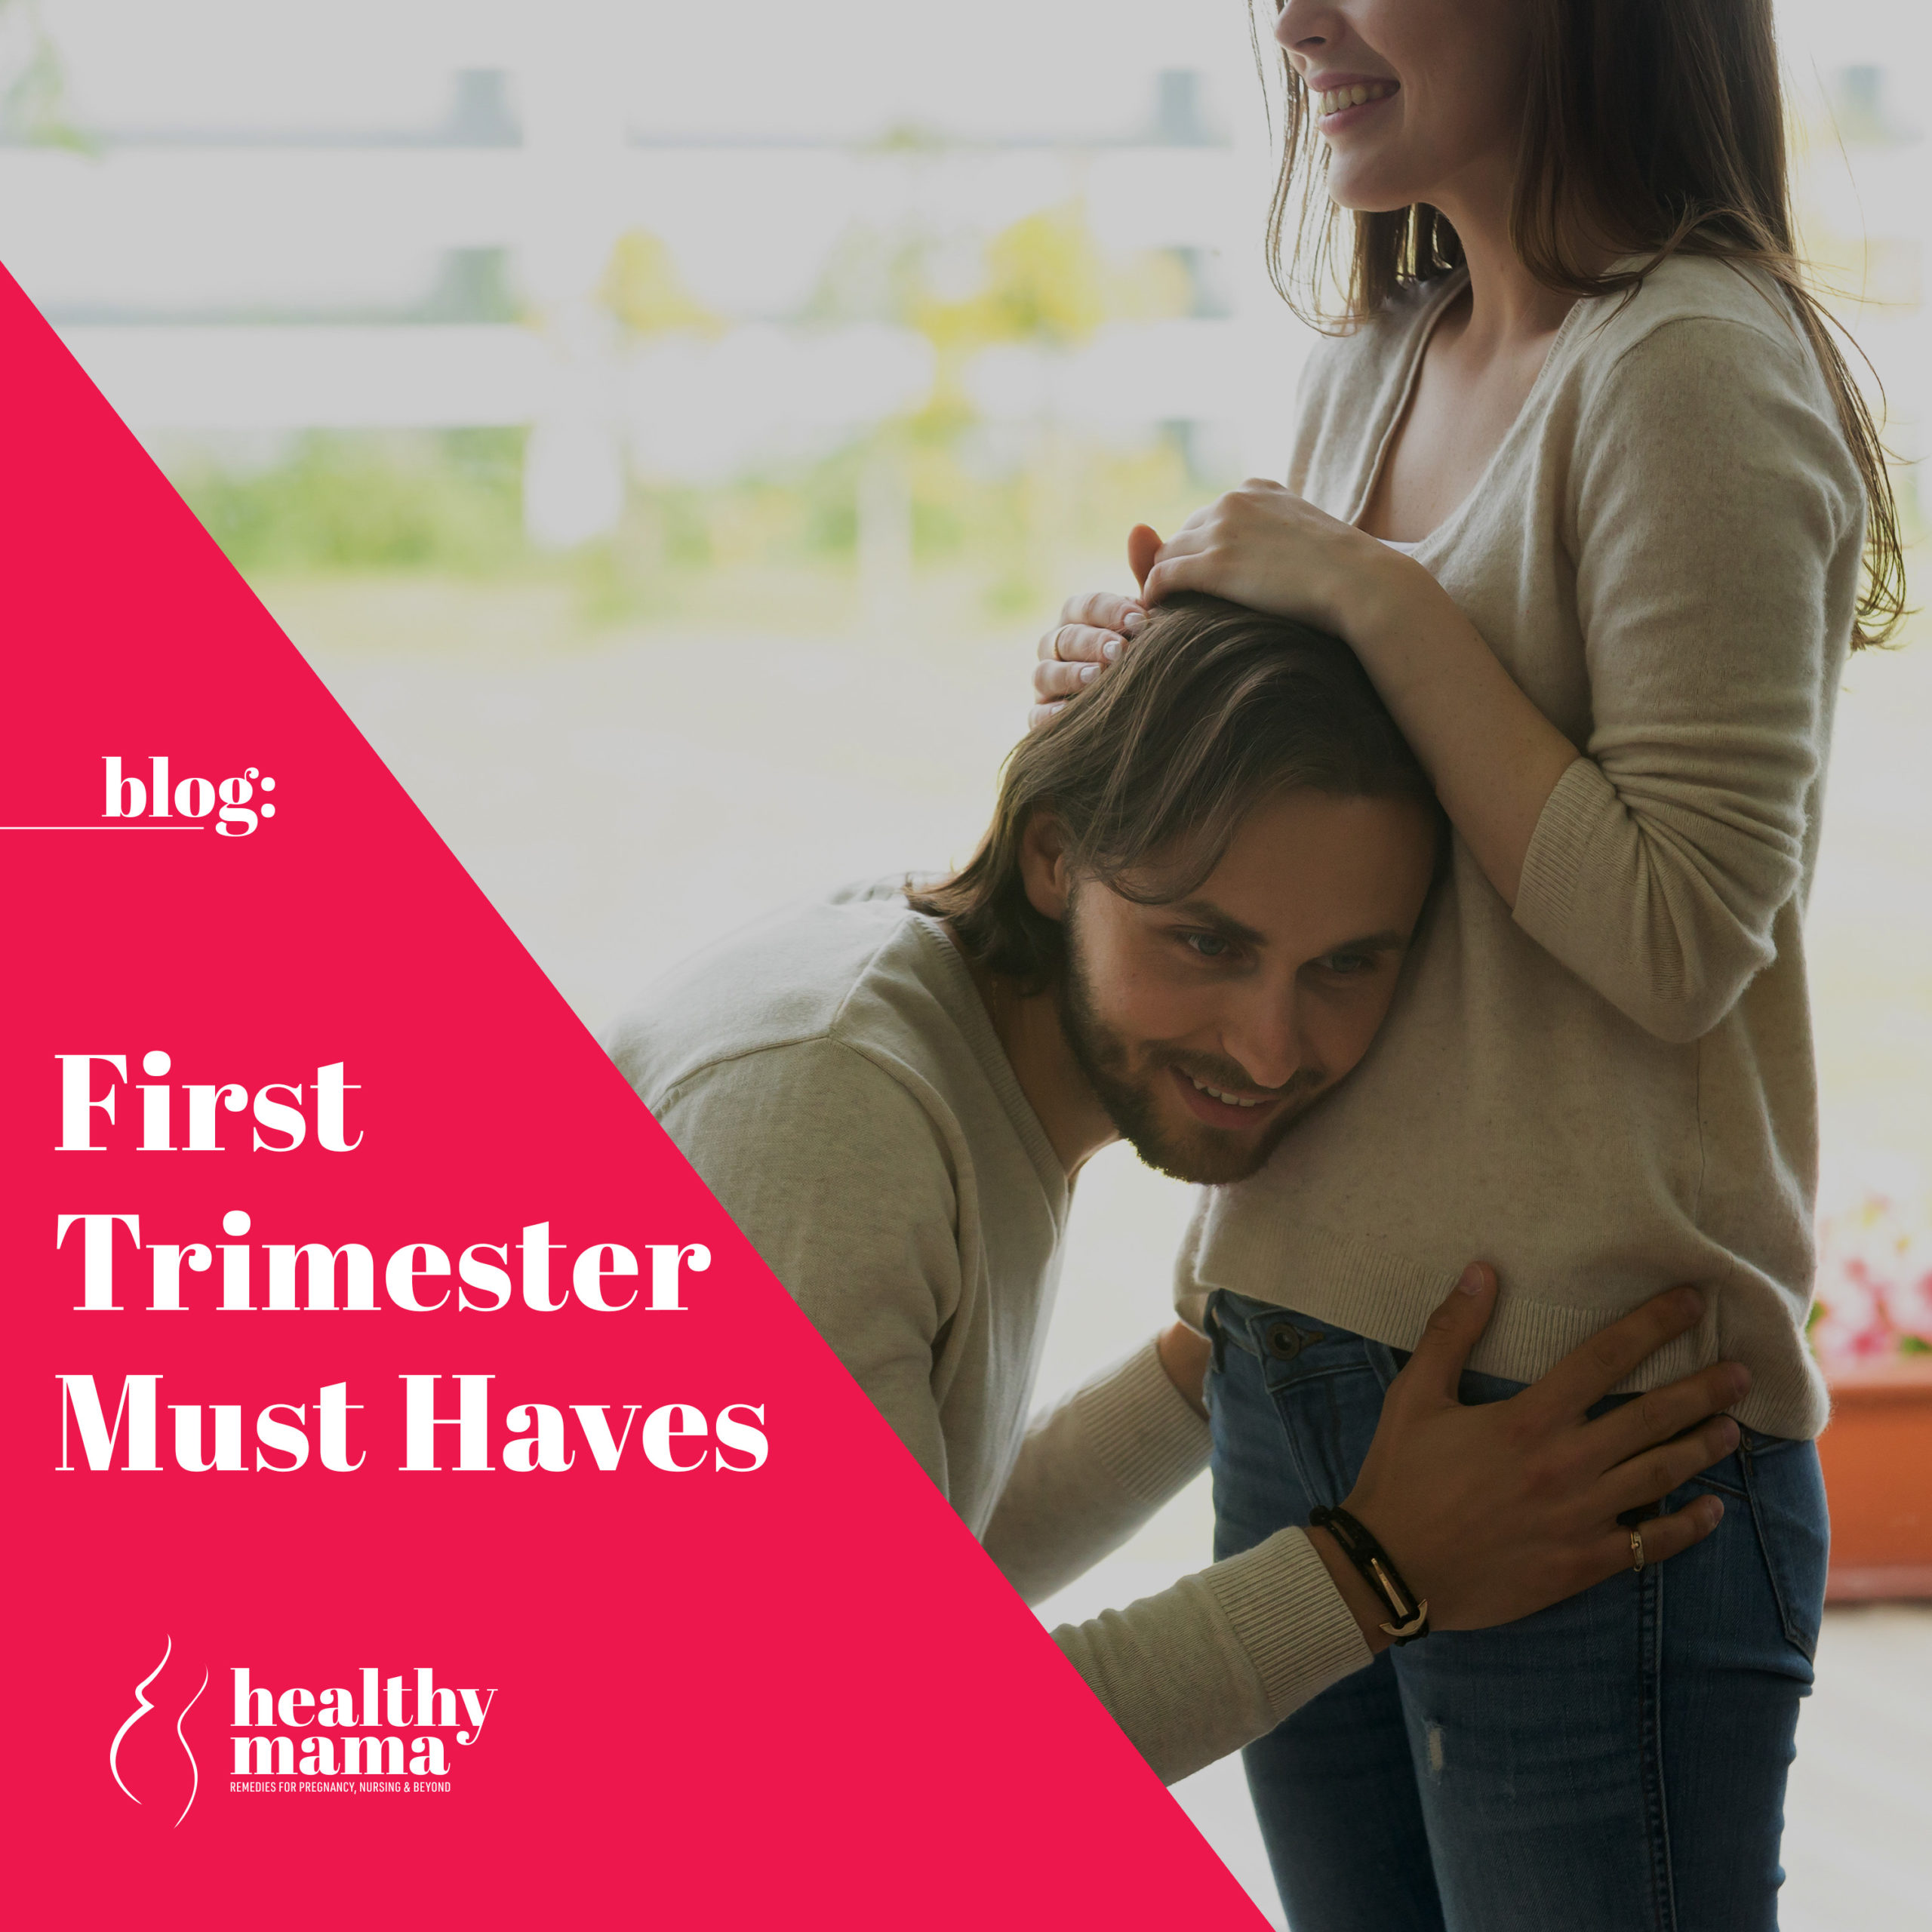 First Trimester Must Haves